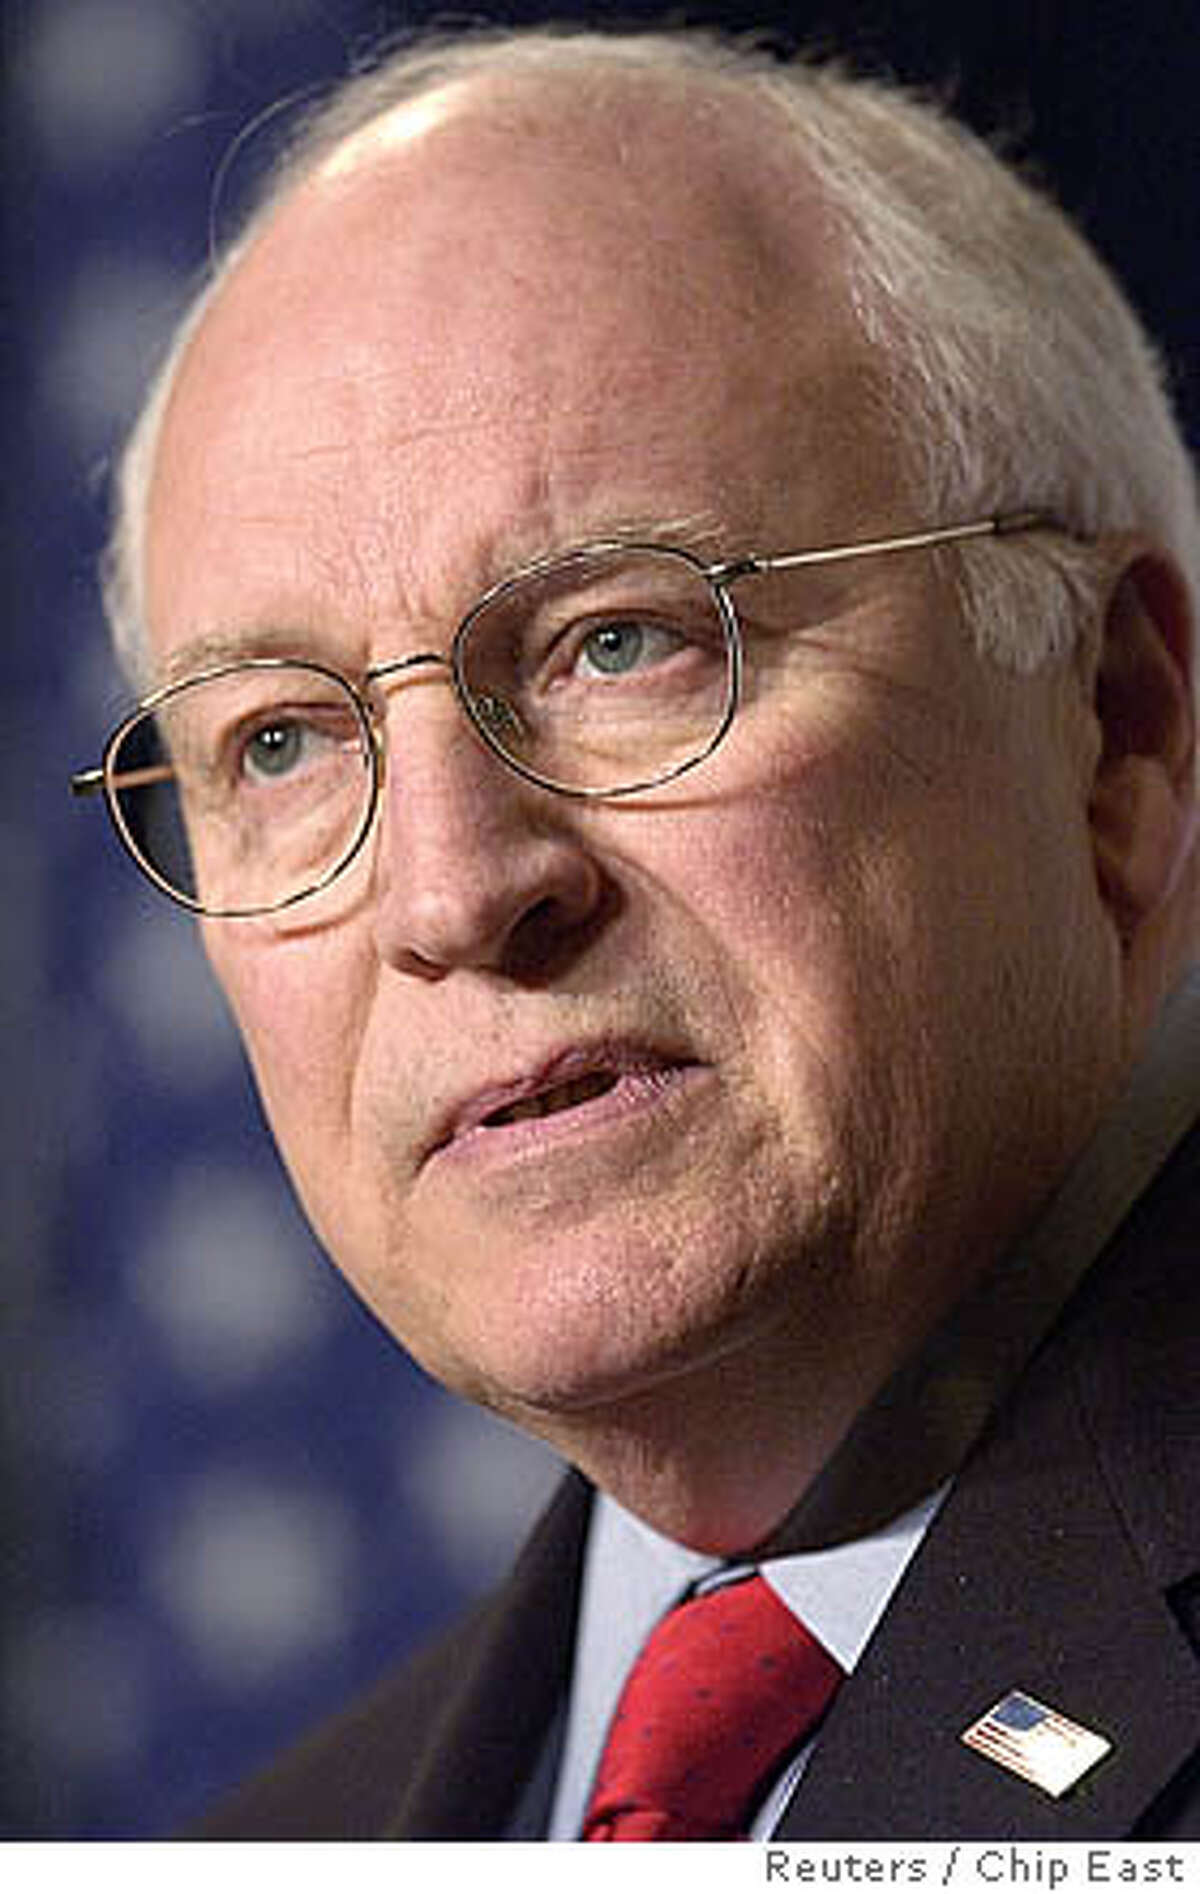 U.S. Vice President Dick Cheney speaks at a luncheon in New York January 19, 2006. Cheney spoke about security concerns from the Middle East to the US mainland. REUTERS/Chip East 0